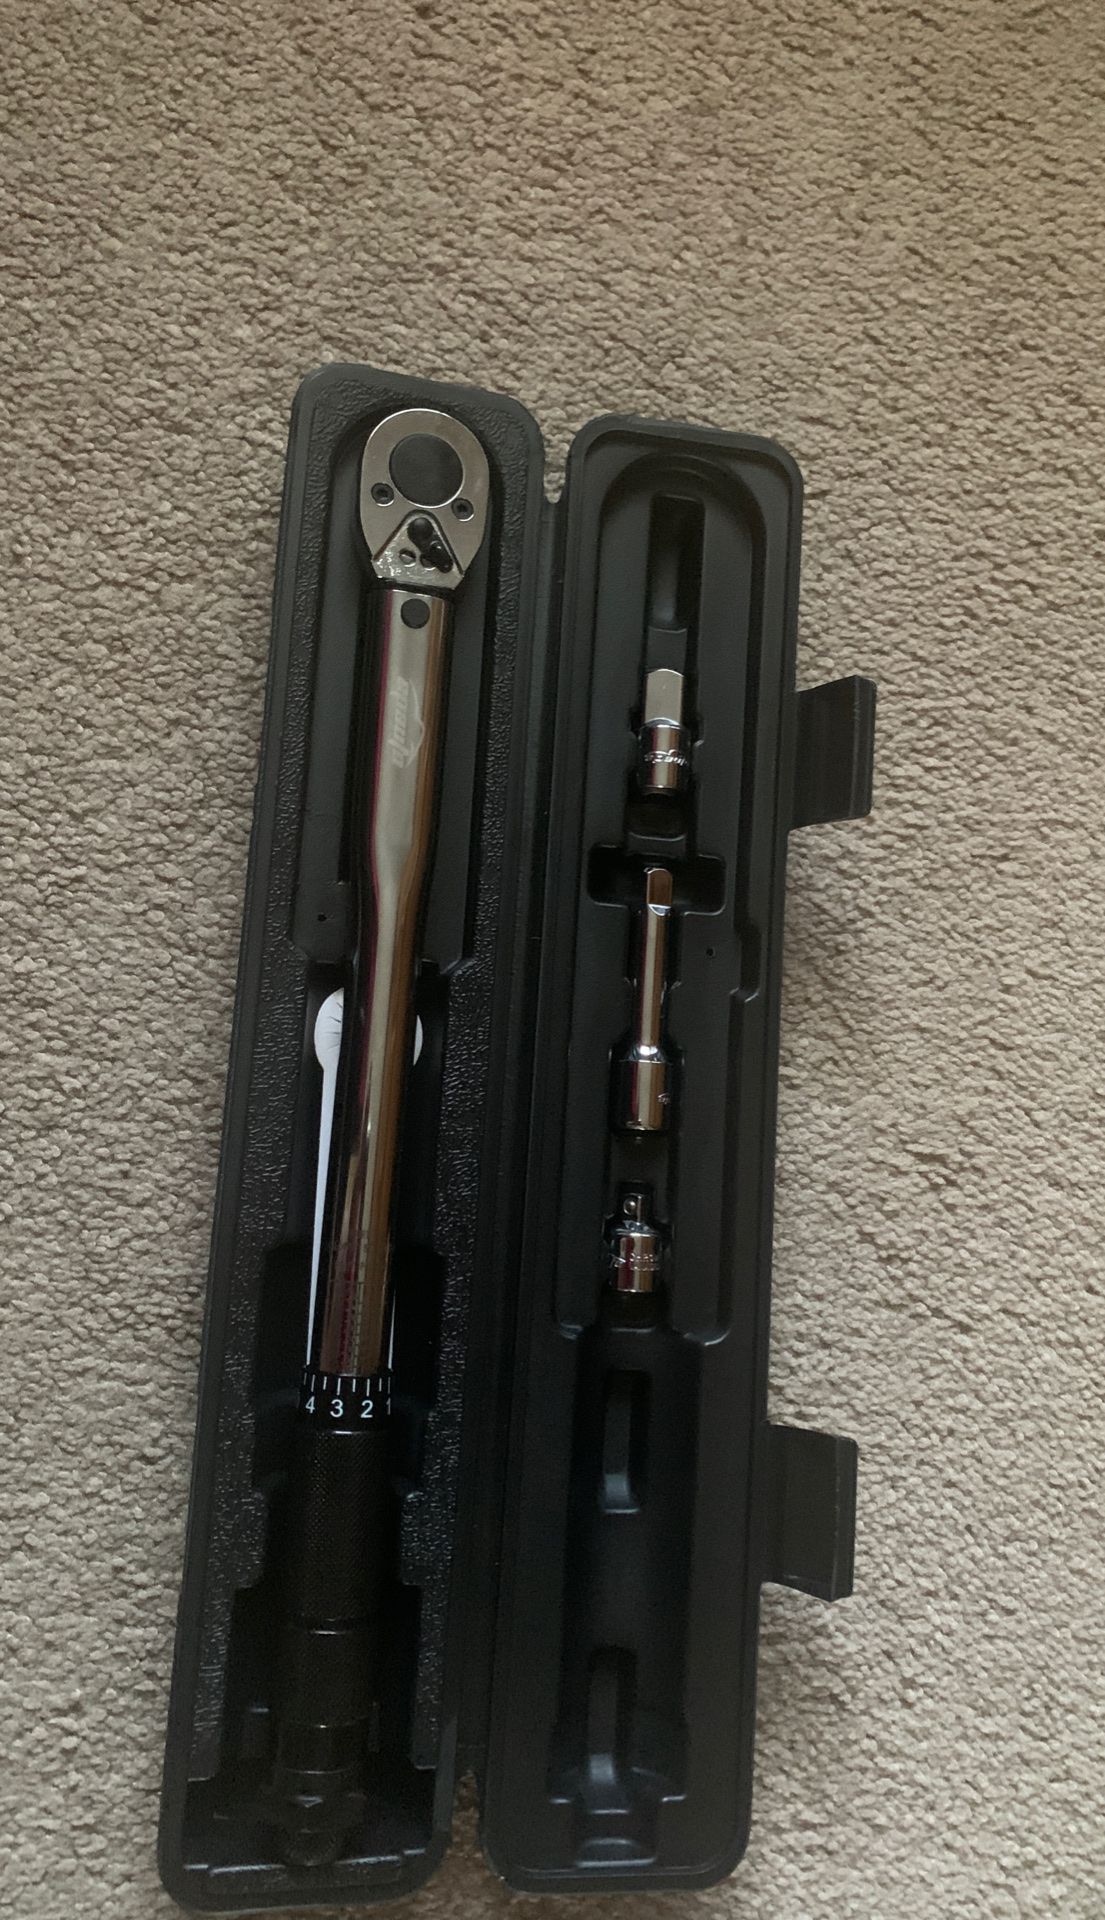 3/8 Drive ClickTorque wrench